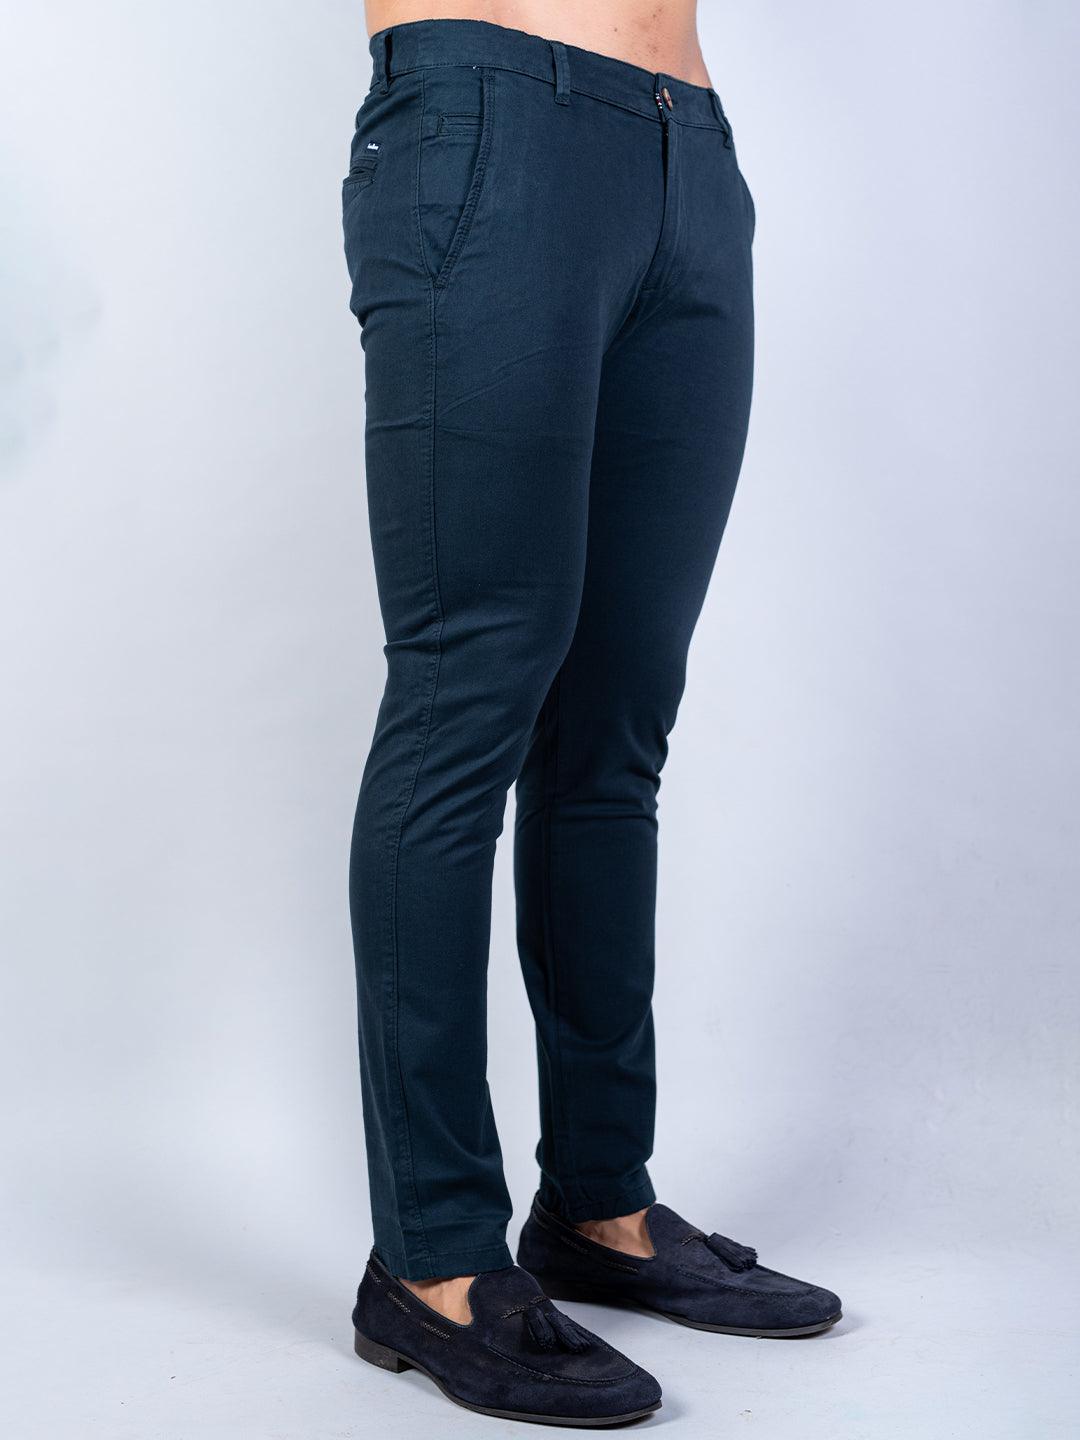 Italian Style Tailor Made Pants Tailored Trousers Slim Fit Super 110 Wool  Dress Pants Light Navy